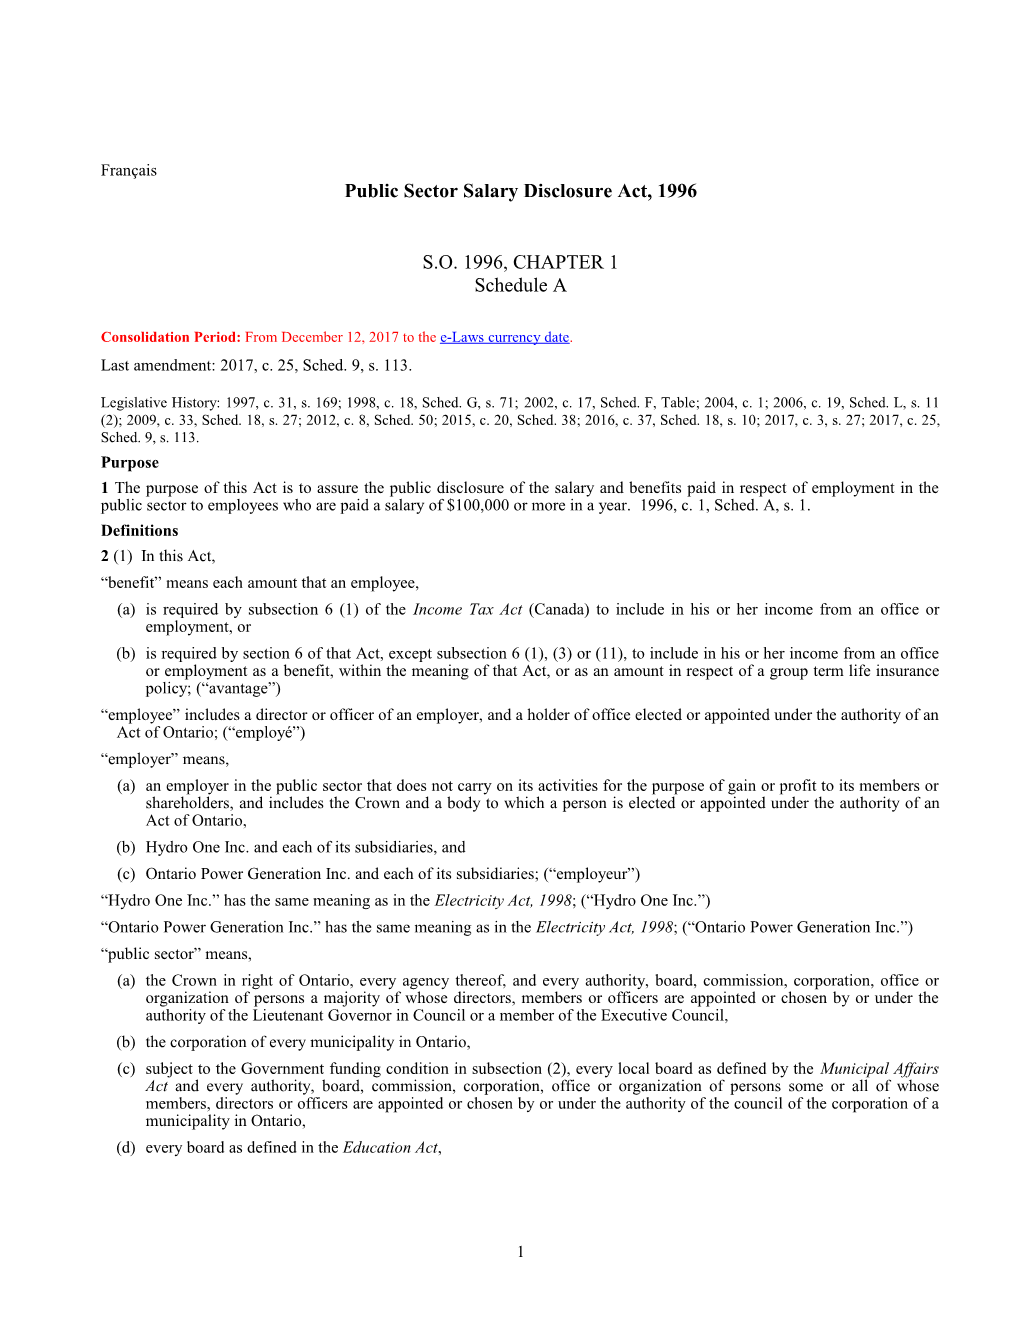 Public Sector Salary Disclosure Act, 1996, S.O. 1996, C. 1, Sched. A